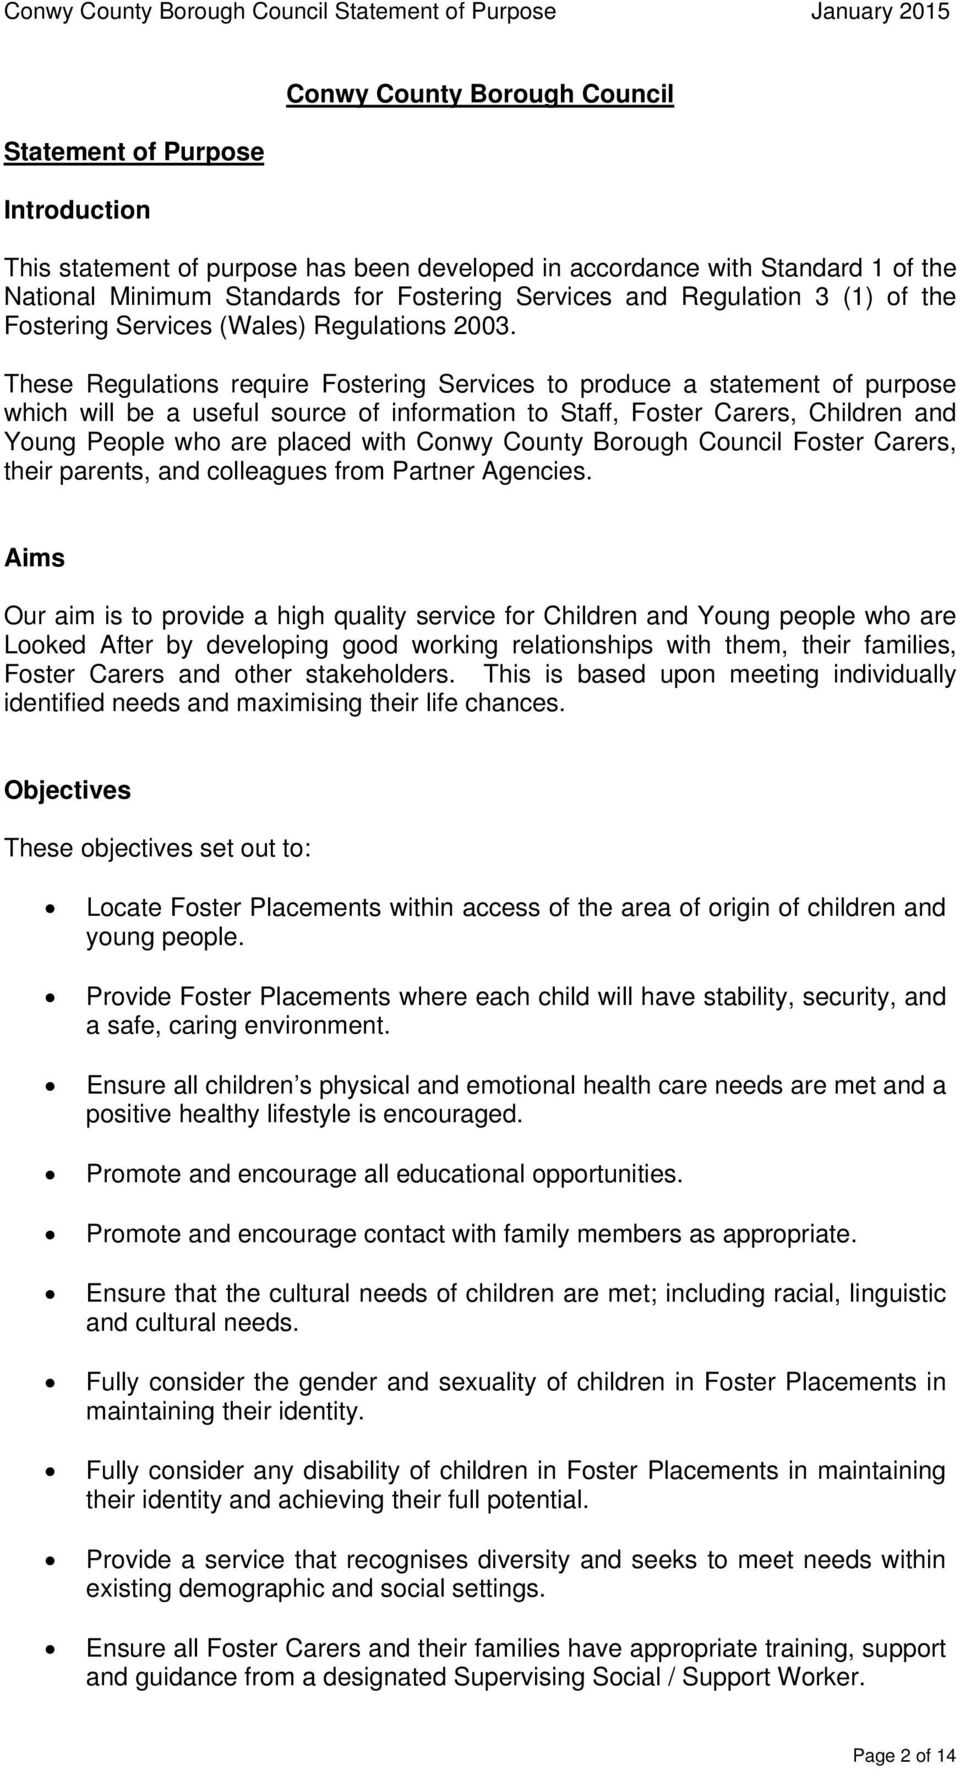 These Regulations require Fostering Services to produce a statement of purpose which will be a useful source of information to Staff, Foster Carers, Children and Young People who are placed with